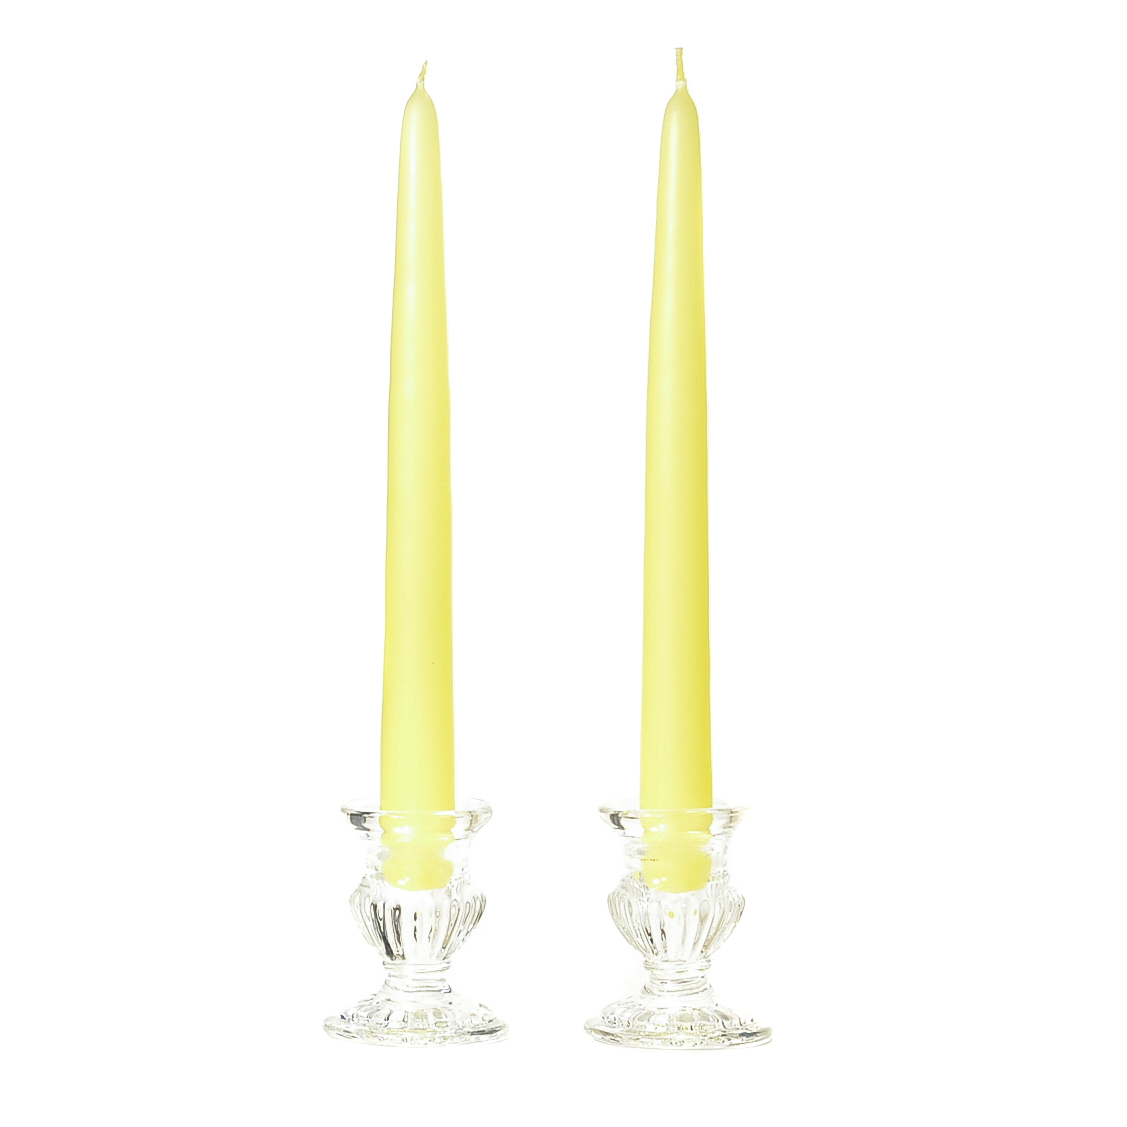 15” paraffin White Taper Candles 